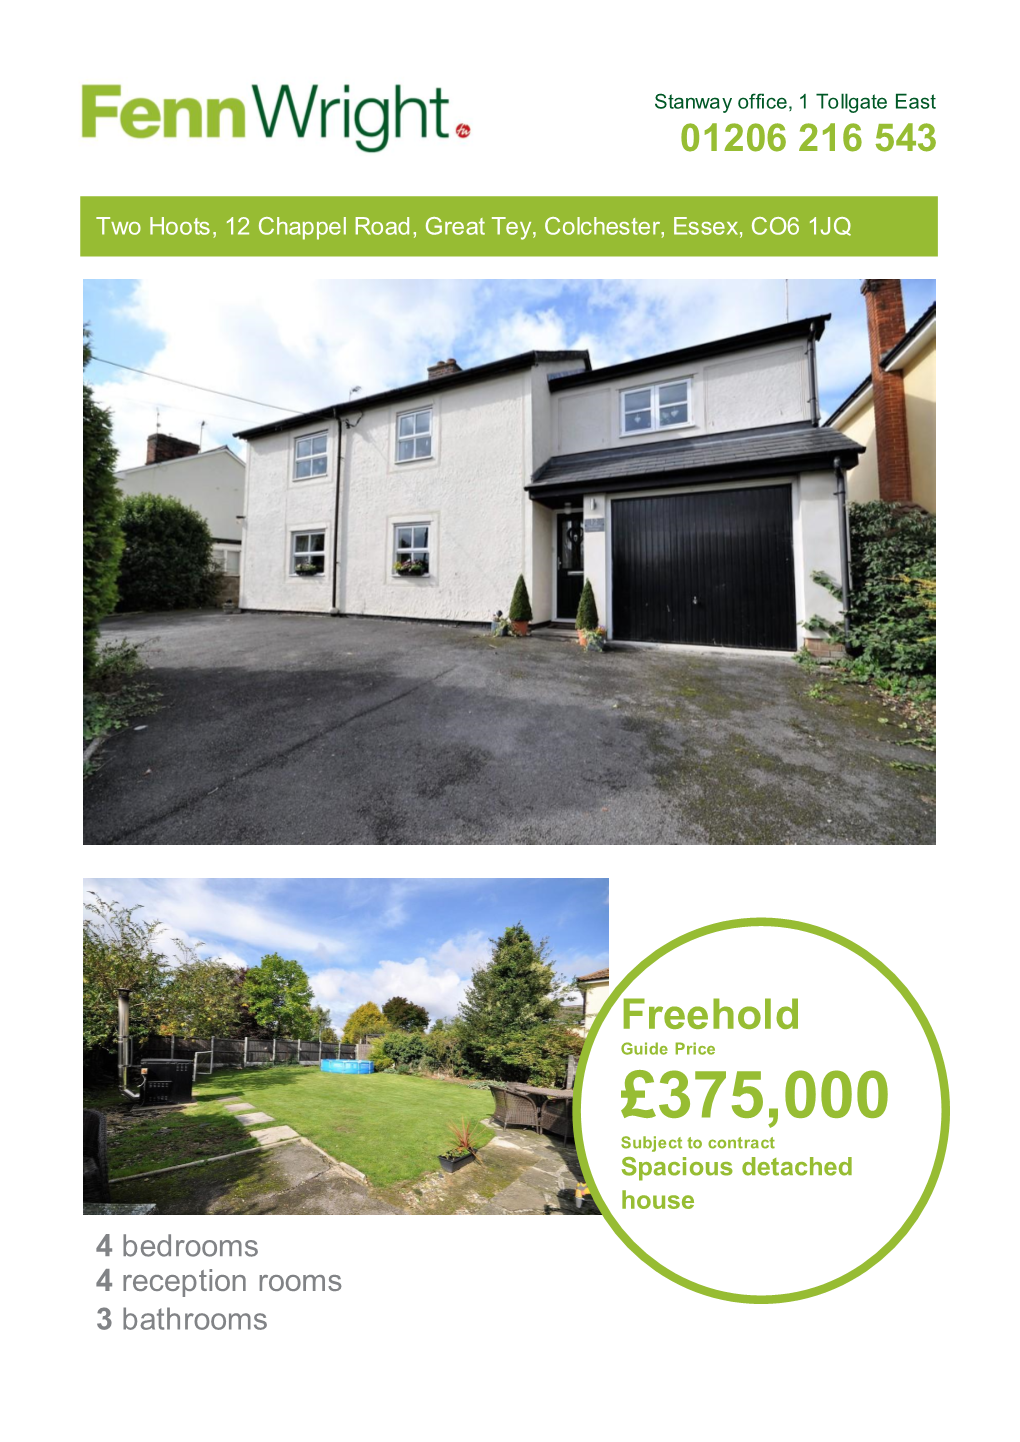 £375,000 Subject to Contract Spacious Detached House